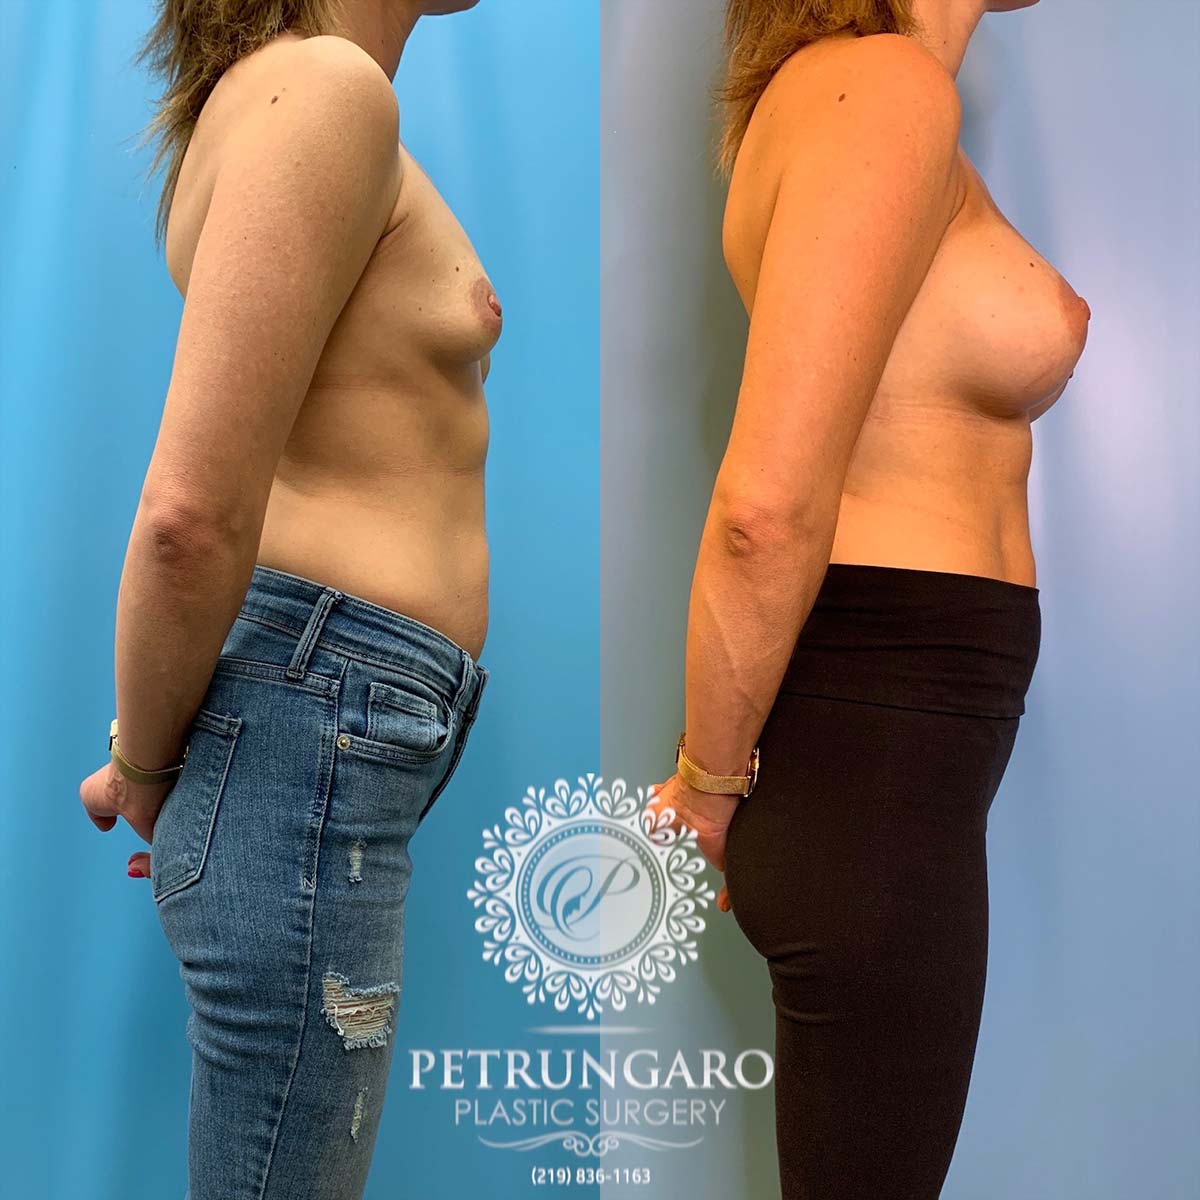 37 year old woman 3 months after breast augmentation-3